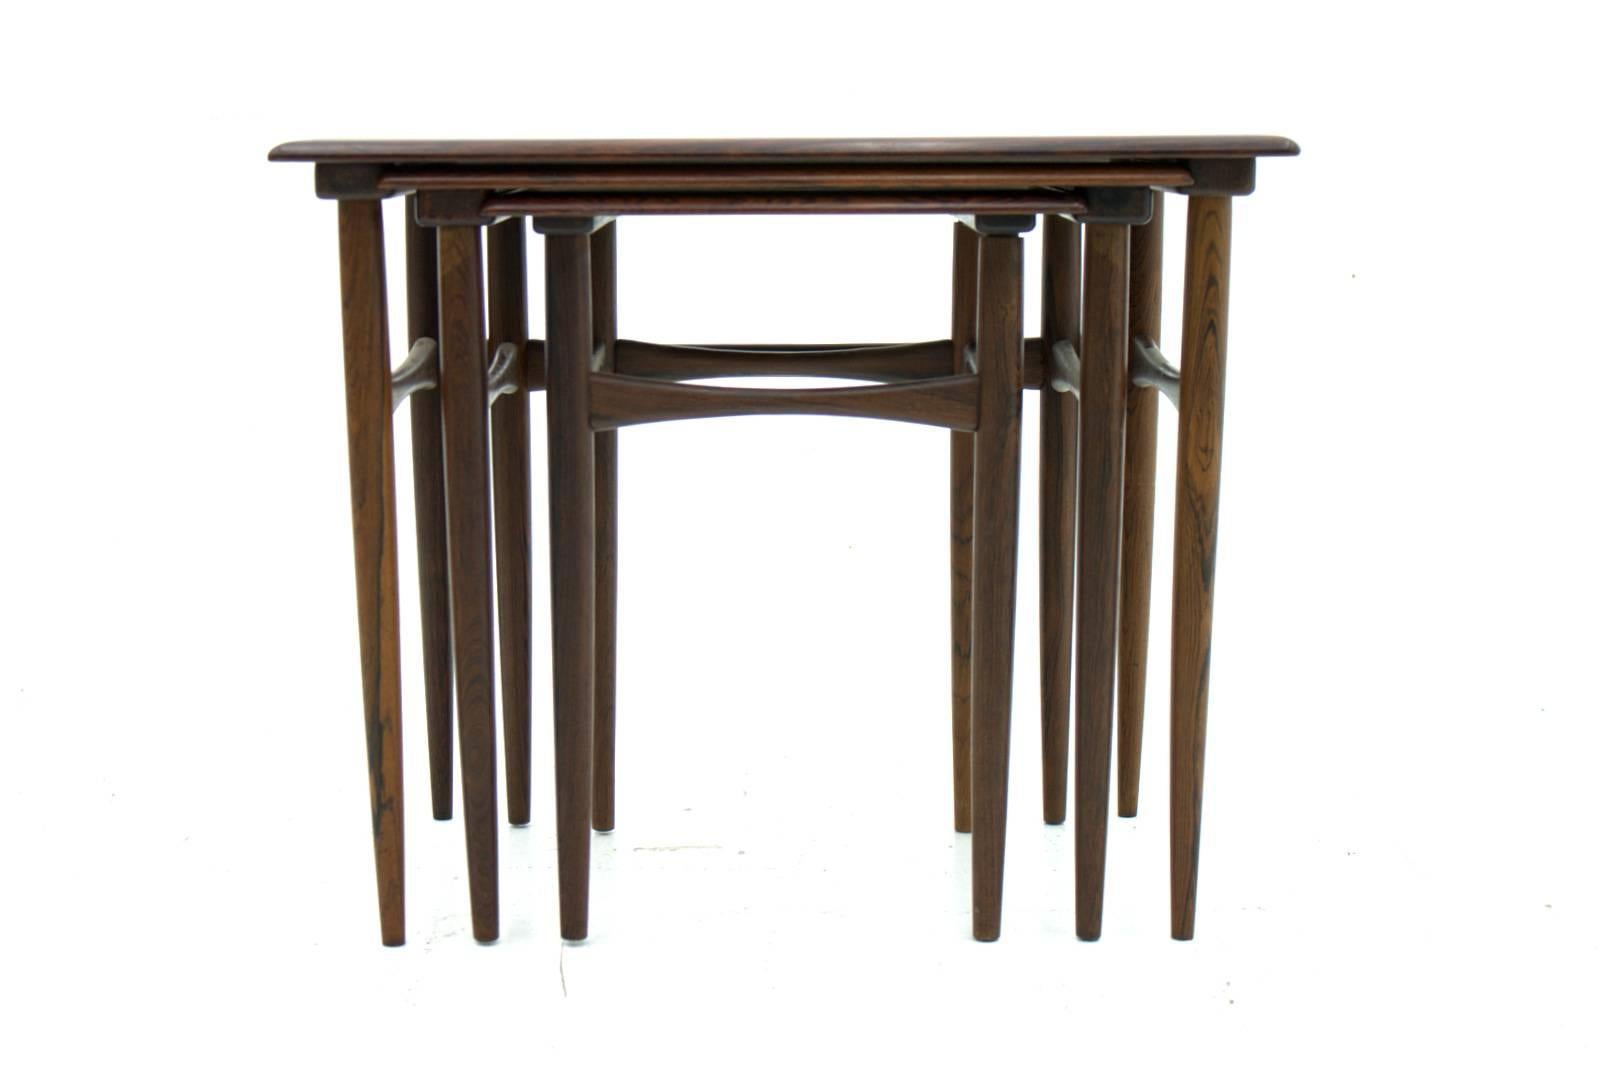 Wood nesting tables, Denmark, 1960s.
Very good condition.

Worldwide shipping.